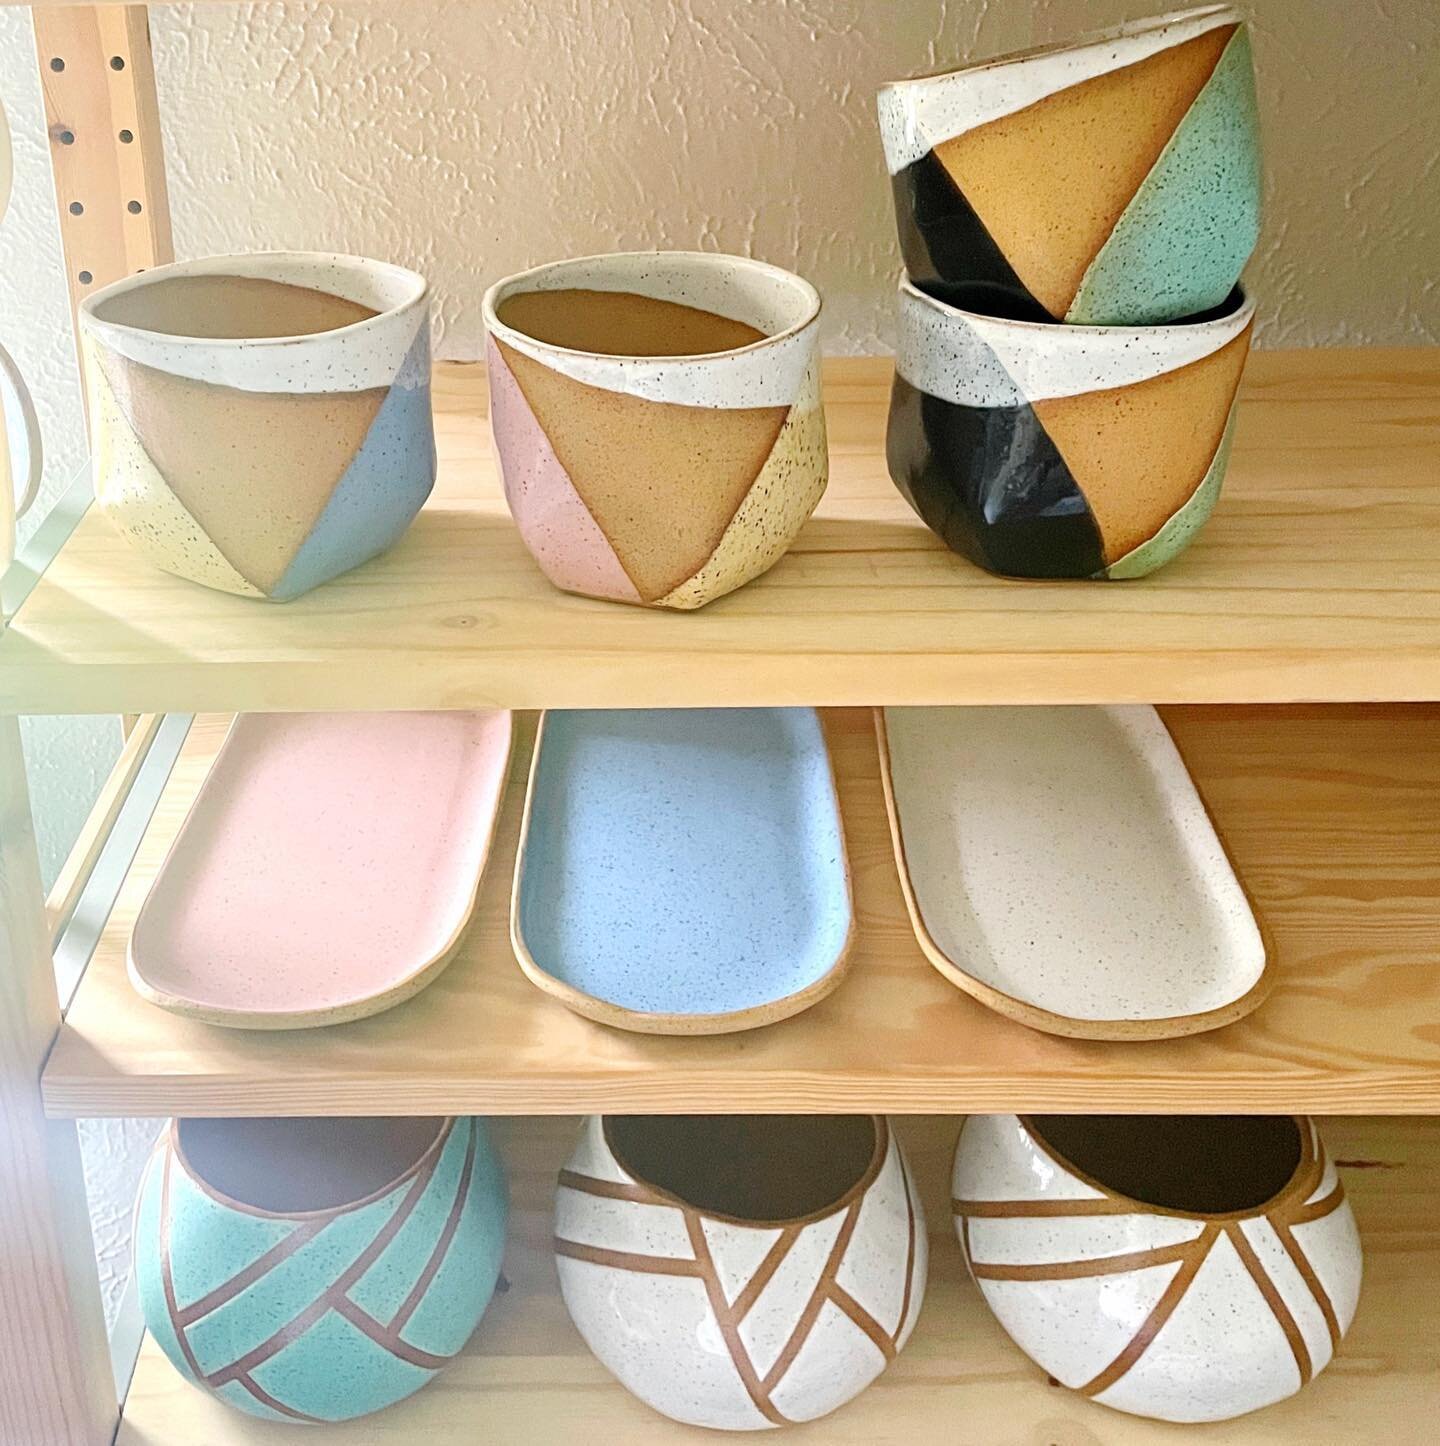 The kiln is cool and I just did a little Sunday restock of the shop! Pictured here top to bottom are Rise planters, Mesa trays, and Pu&rsquo;u planters&hellip; also restocked 👉🏼 Kiwi planters, Trio dishes, and Kure dishes 🤗
.
#ceramics #shelvesofc